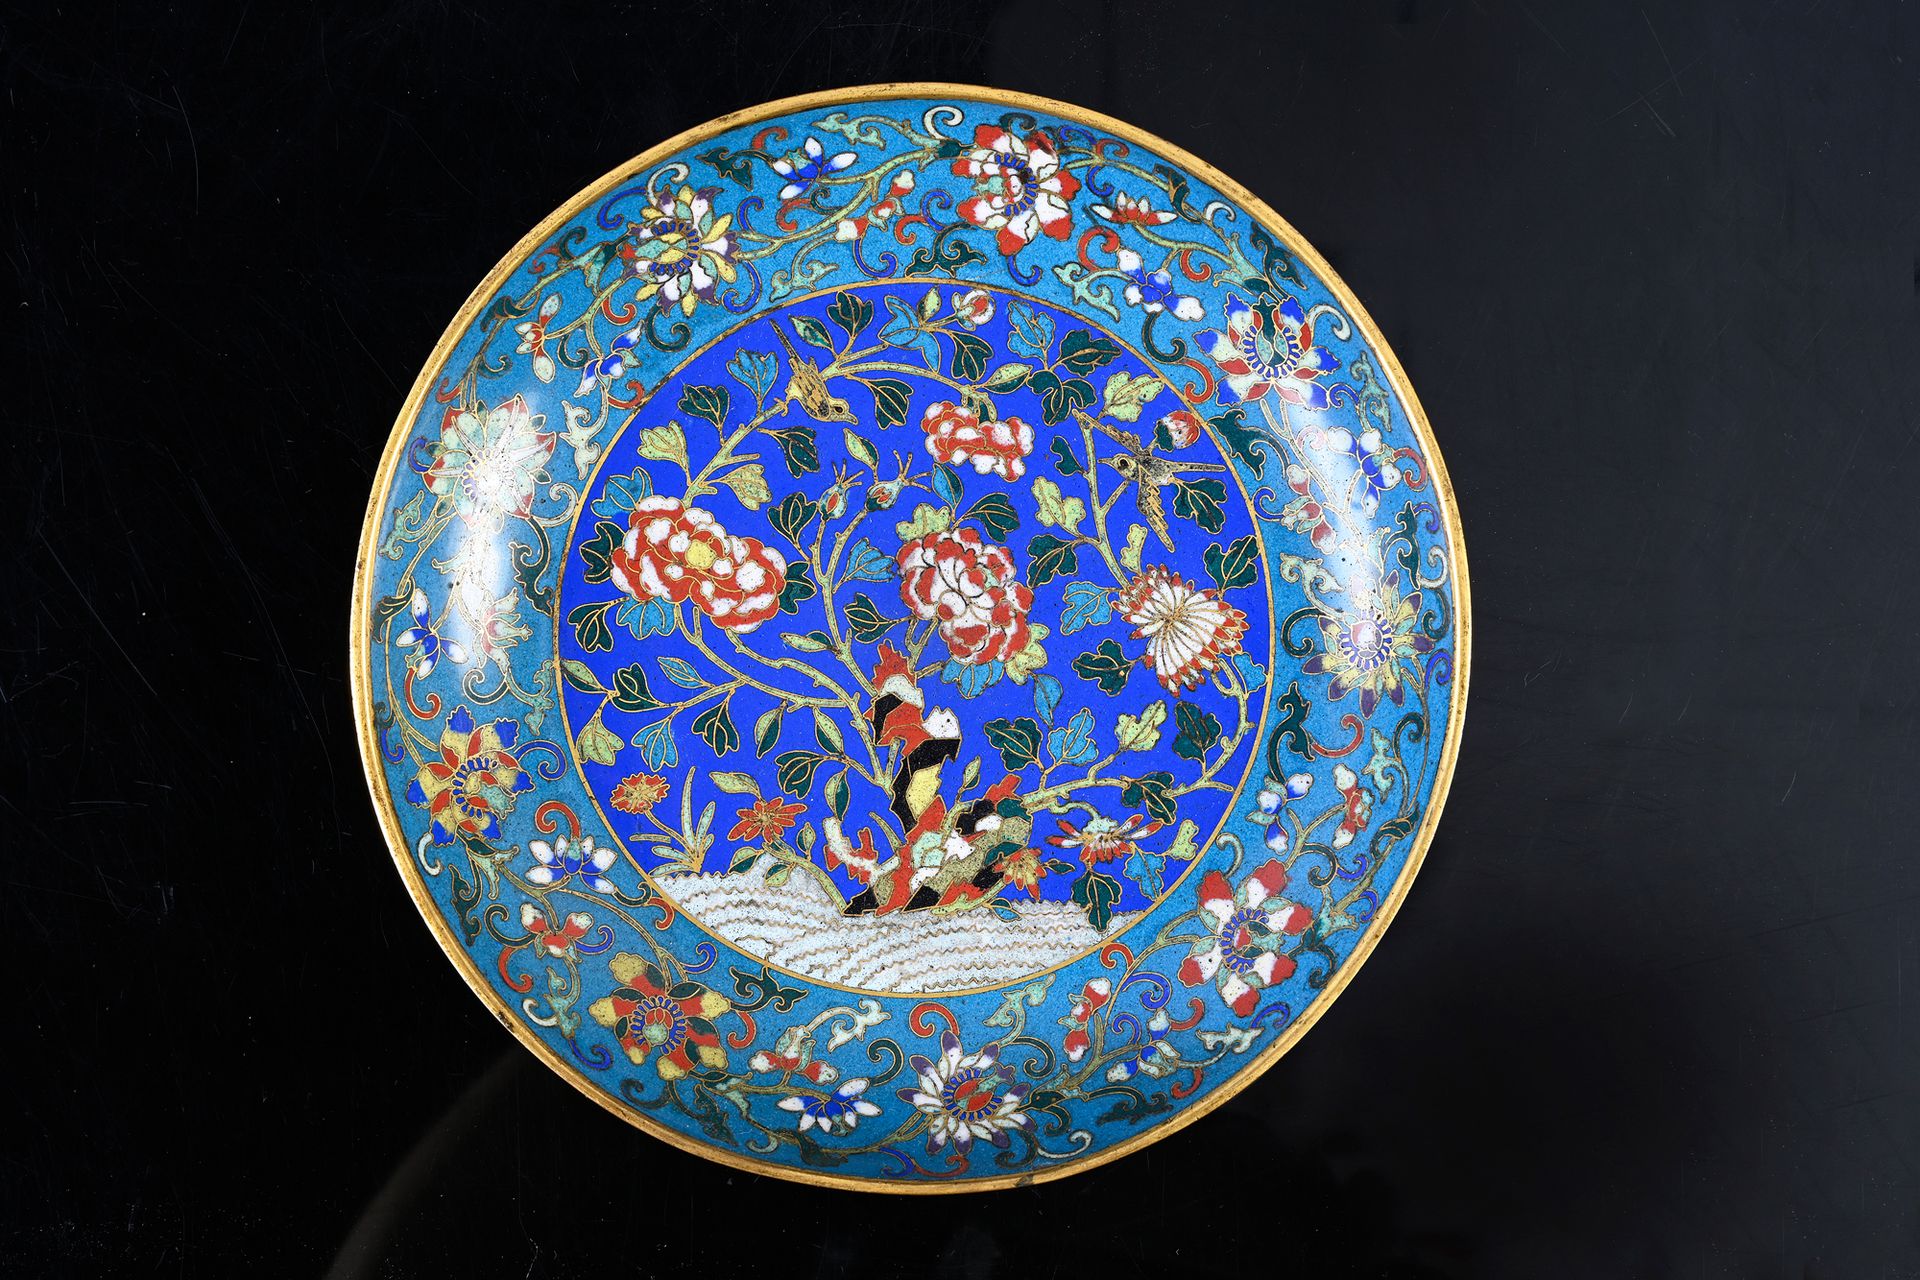 CHINE, XIXe siècle Dish in cloisonné enamel
Presenting in the central medallion &hellip;